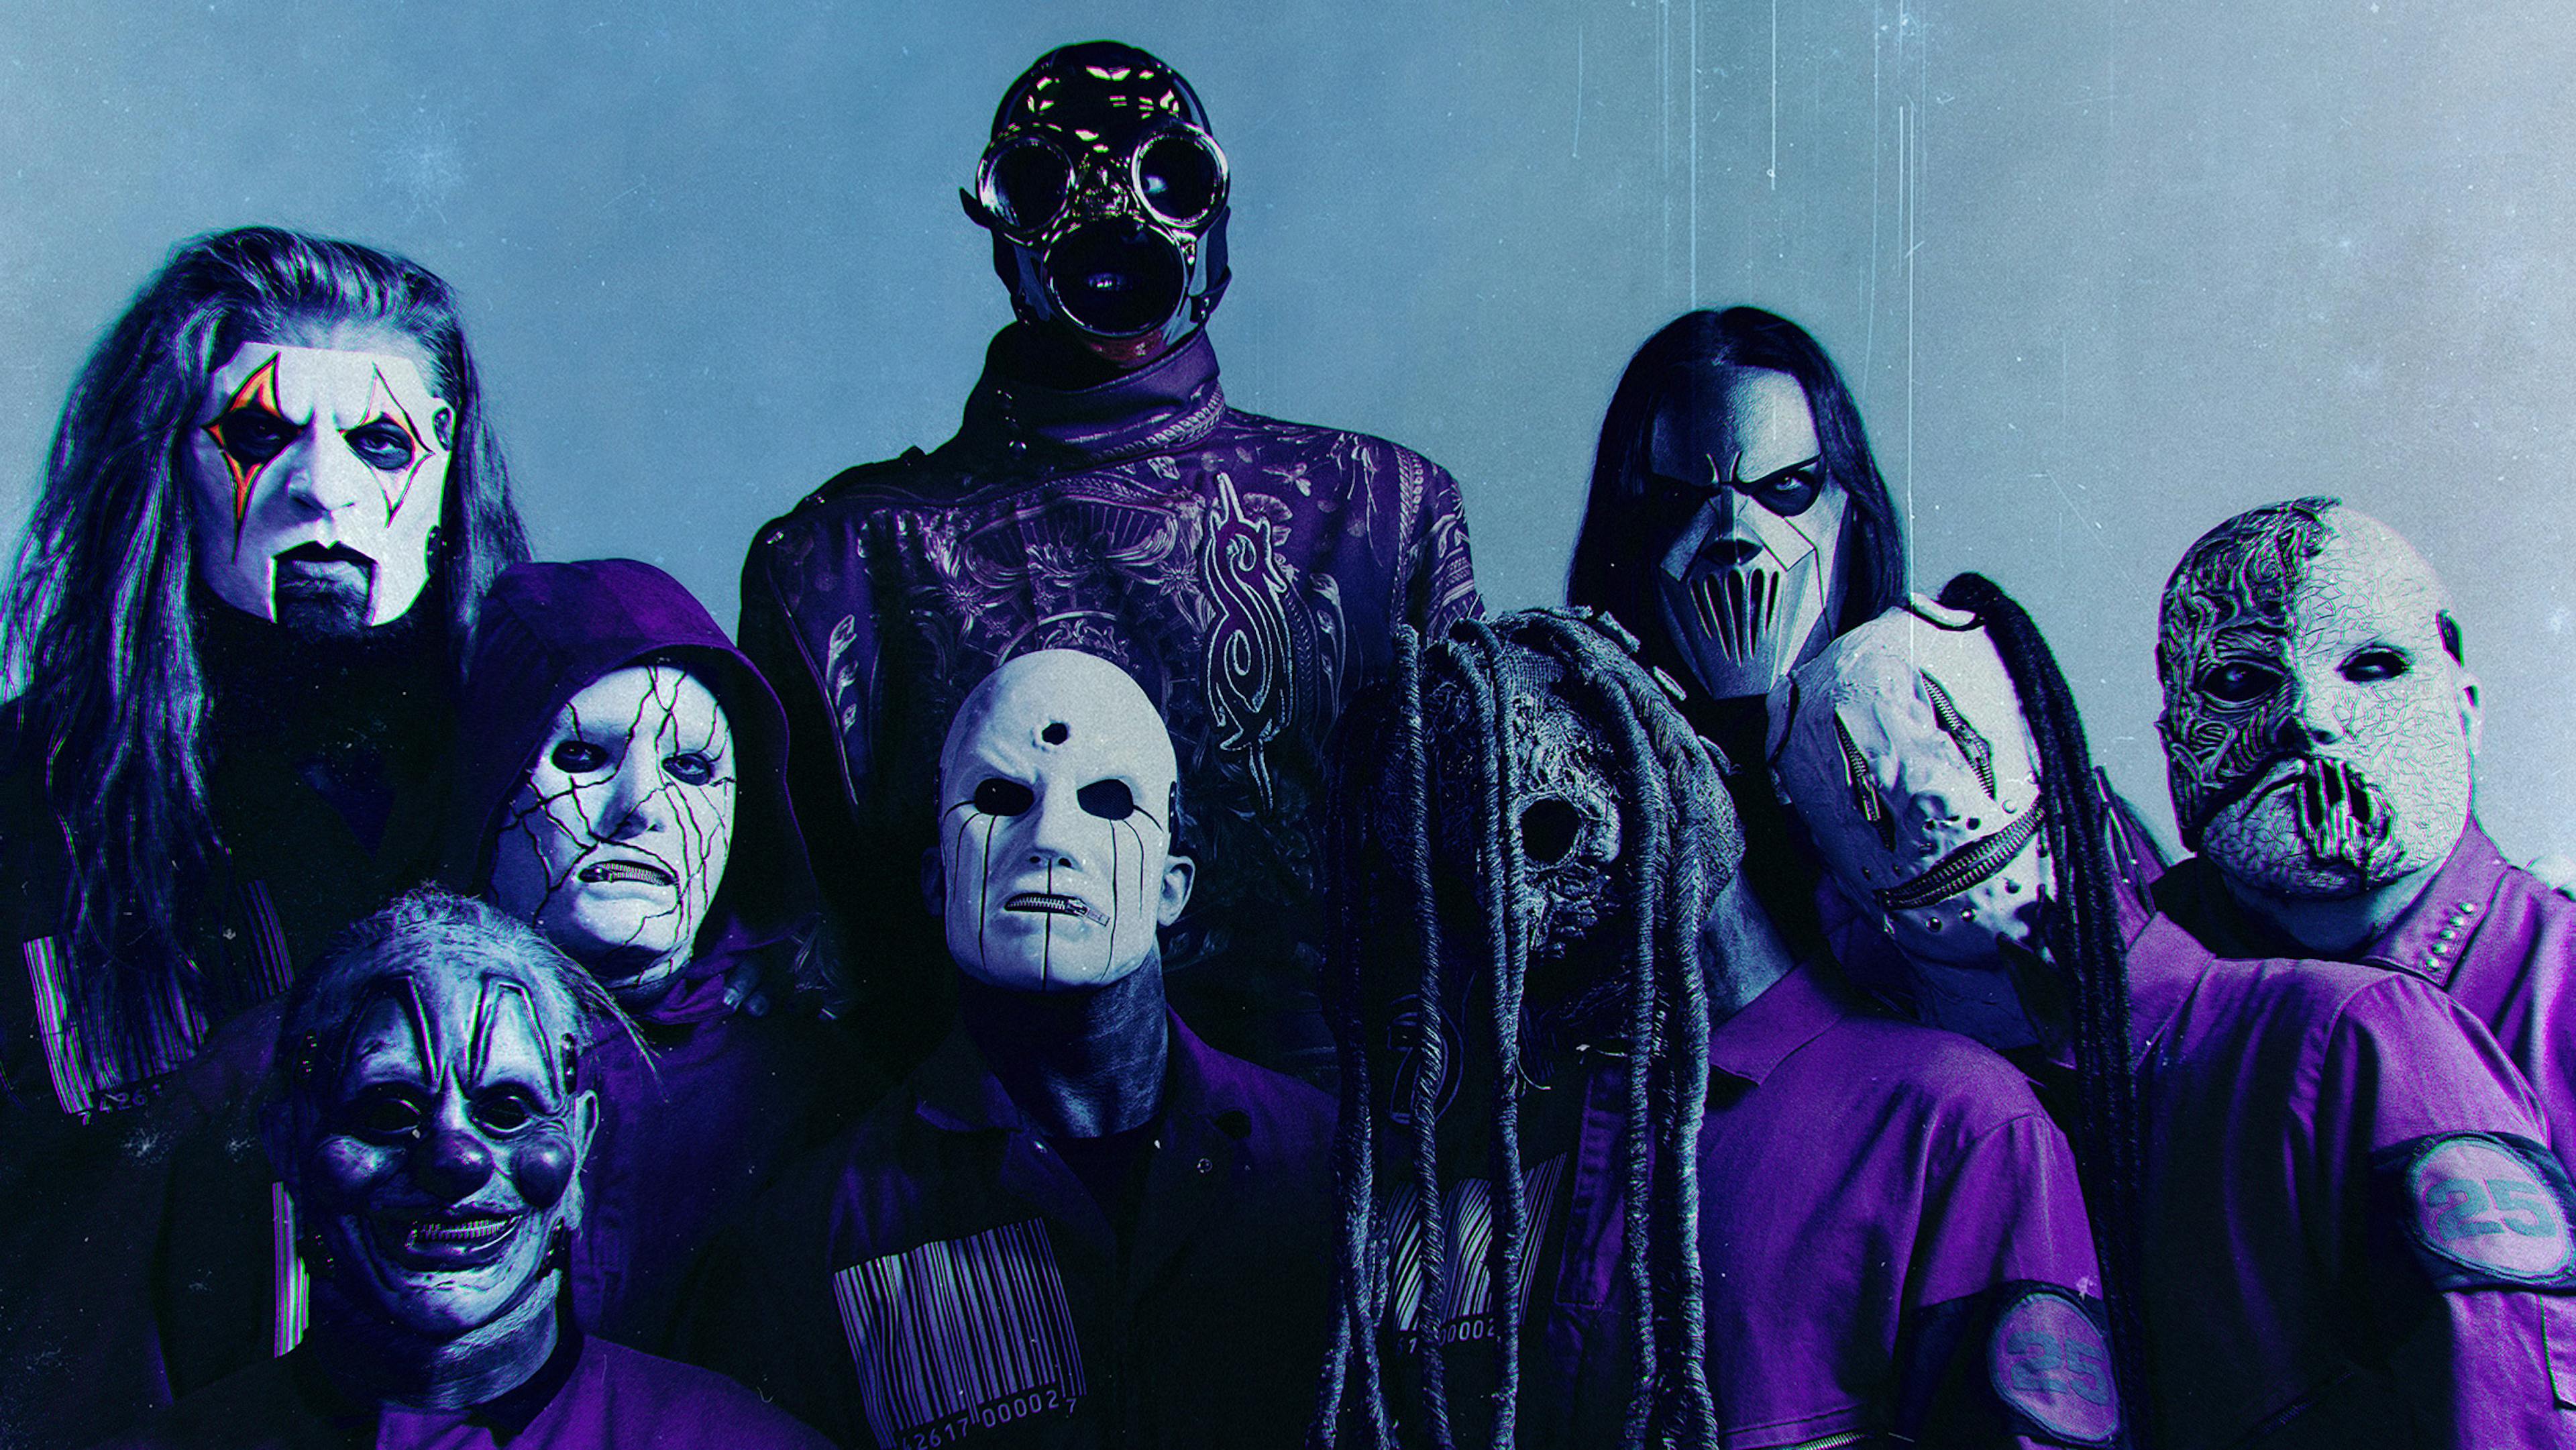 “It feels real for everyone”: Slipknot share up-close looks at all their new masks